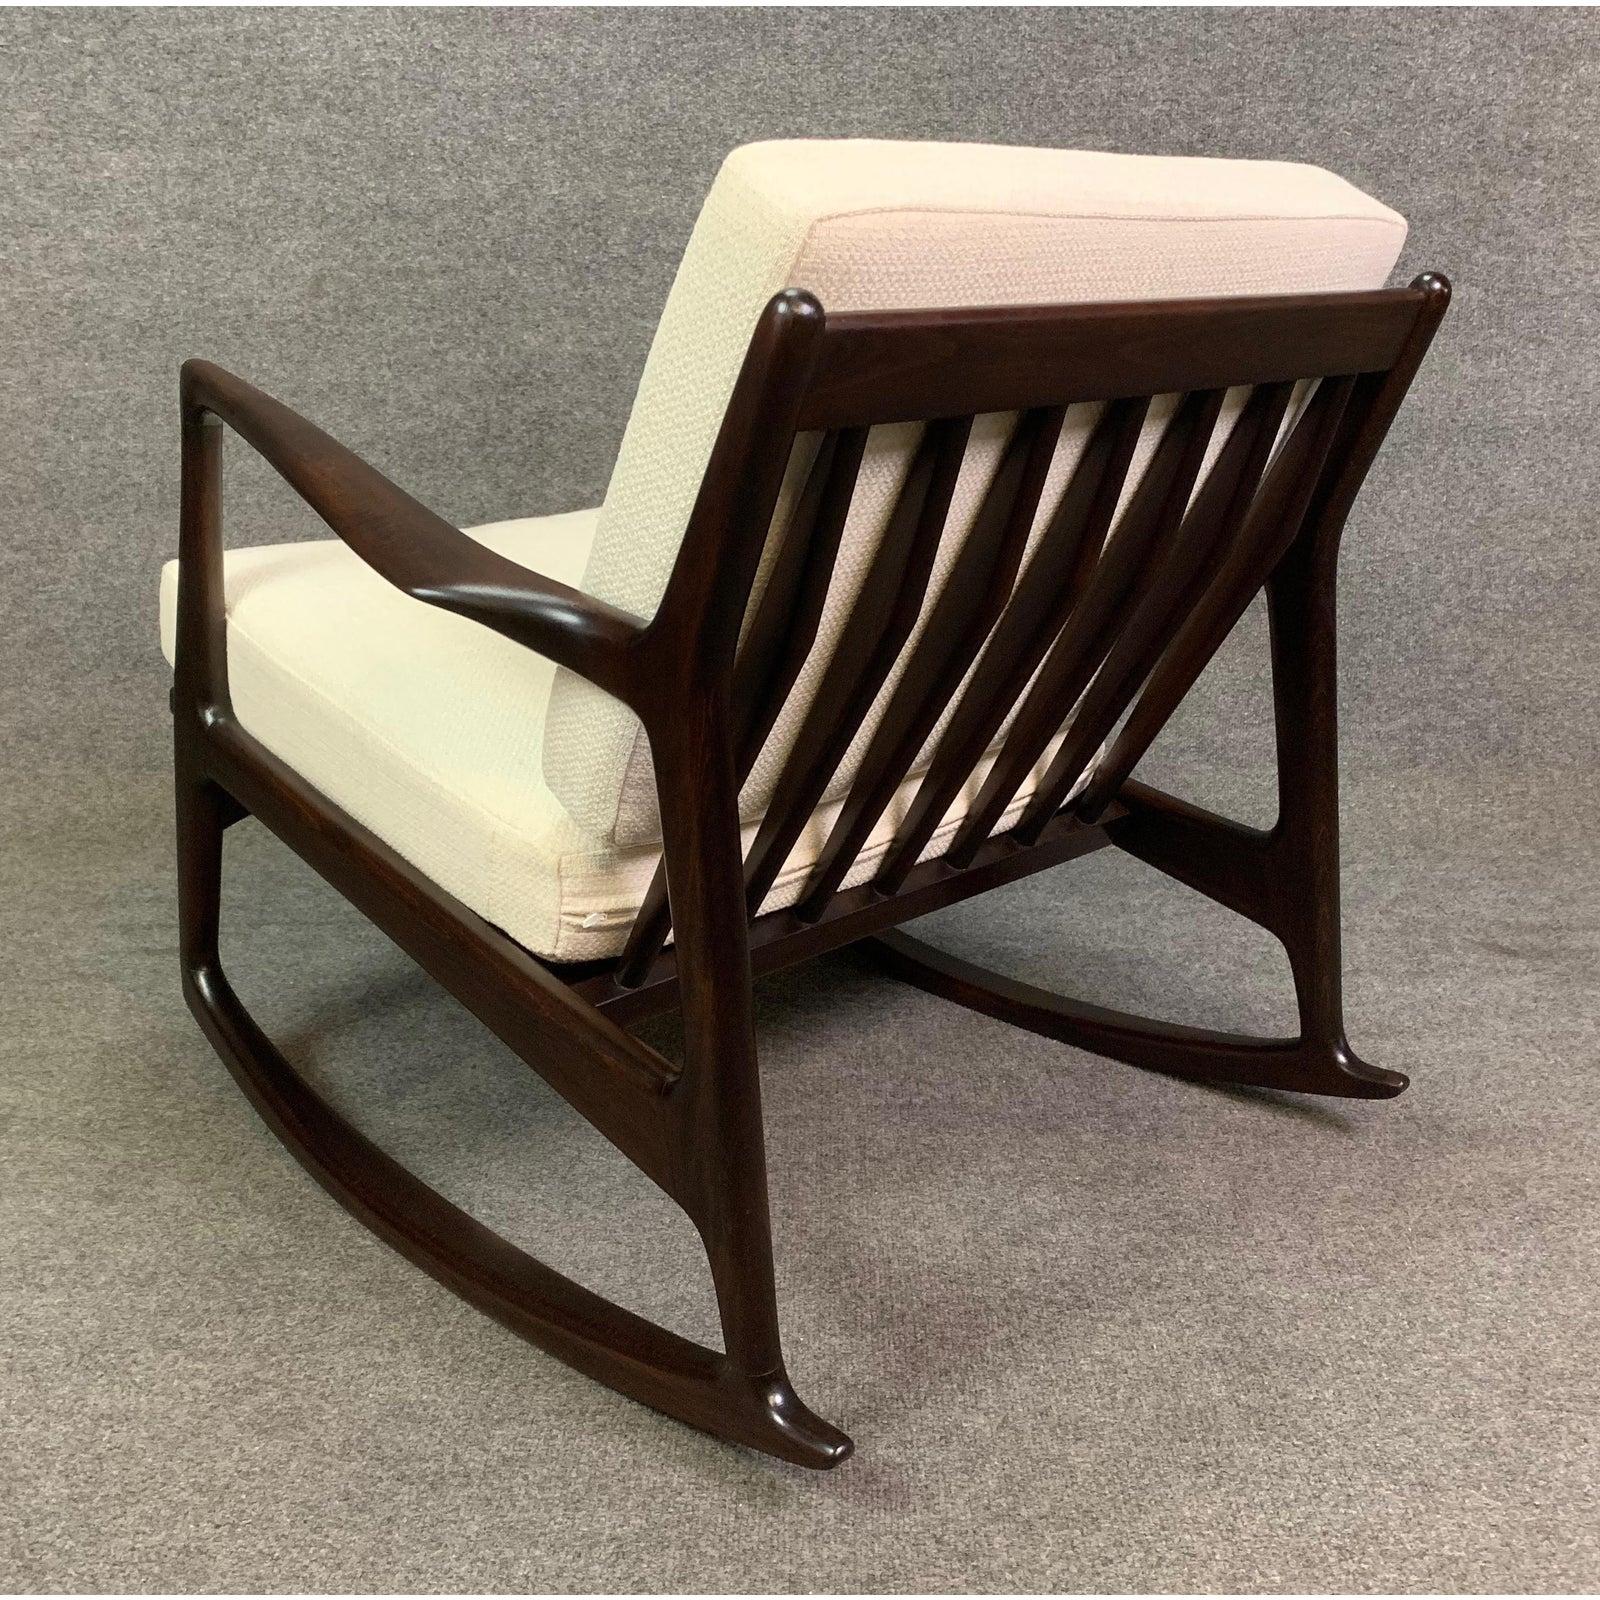 Here is a sculptural Scandinavian Modern rocking chair in dark mahogany stained beechwood designed by Ib Kofod Larsen and manufactured by Selig in Denmark in the 1960s.
This beautiful rocker features exquisite modern lines, a solid wood frame